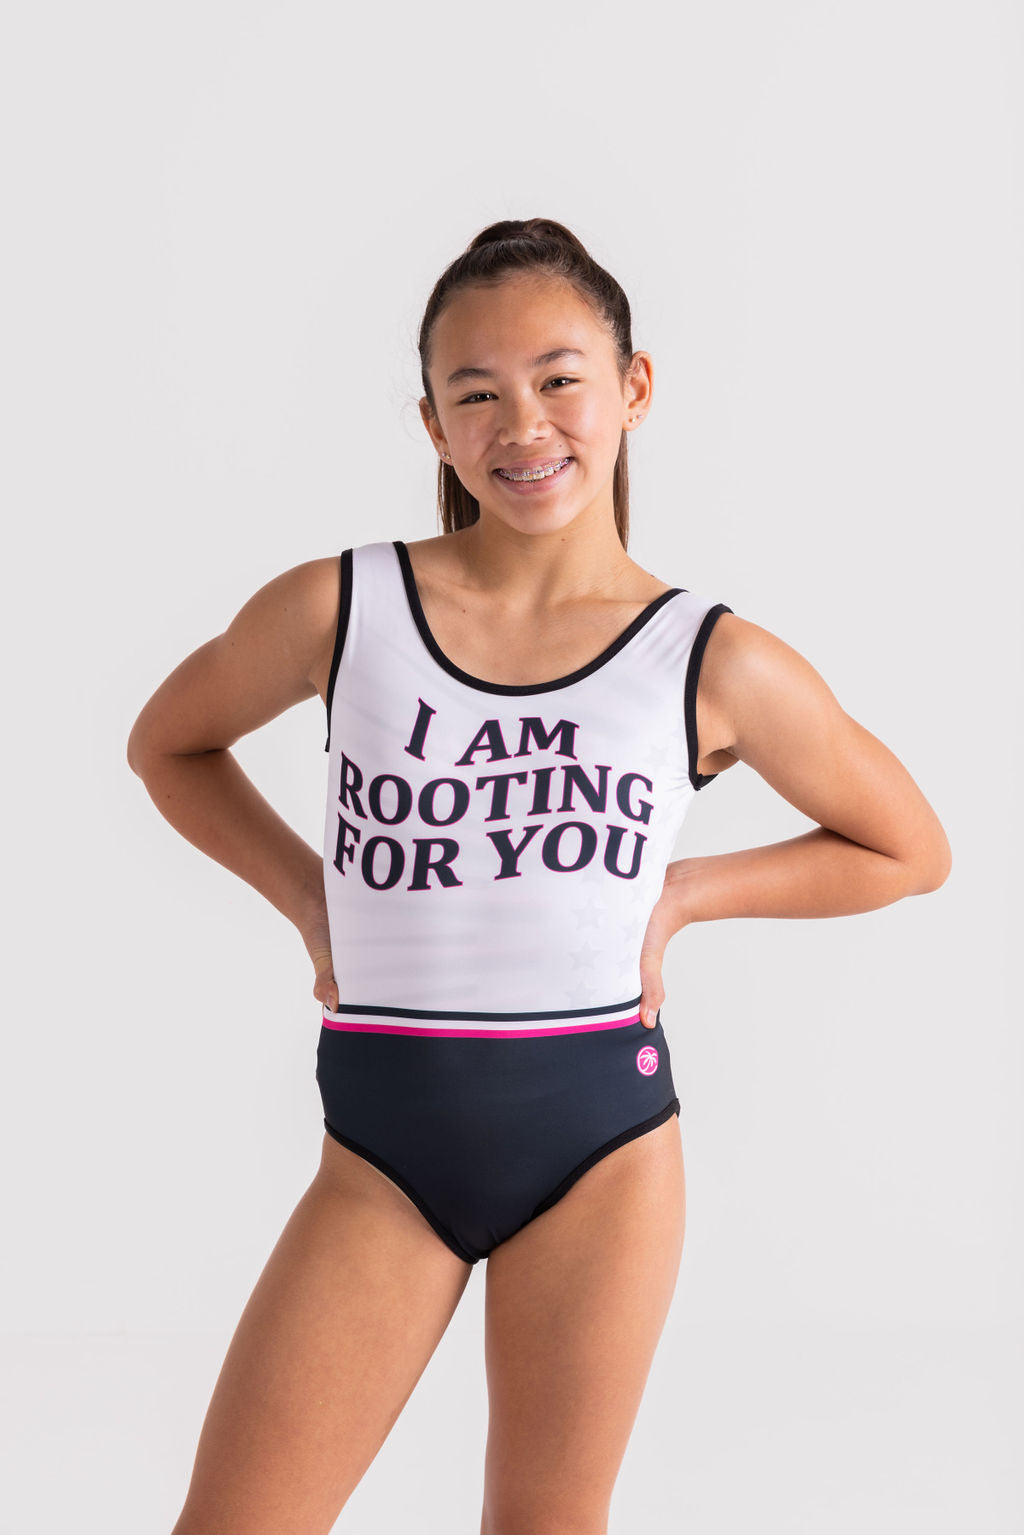 "I AM ROOTING FOR YOU" Leotard